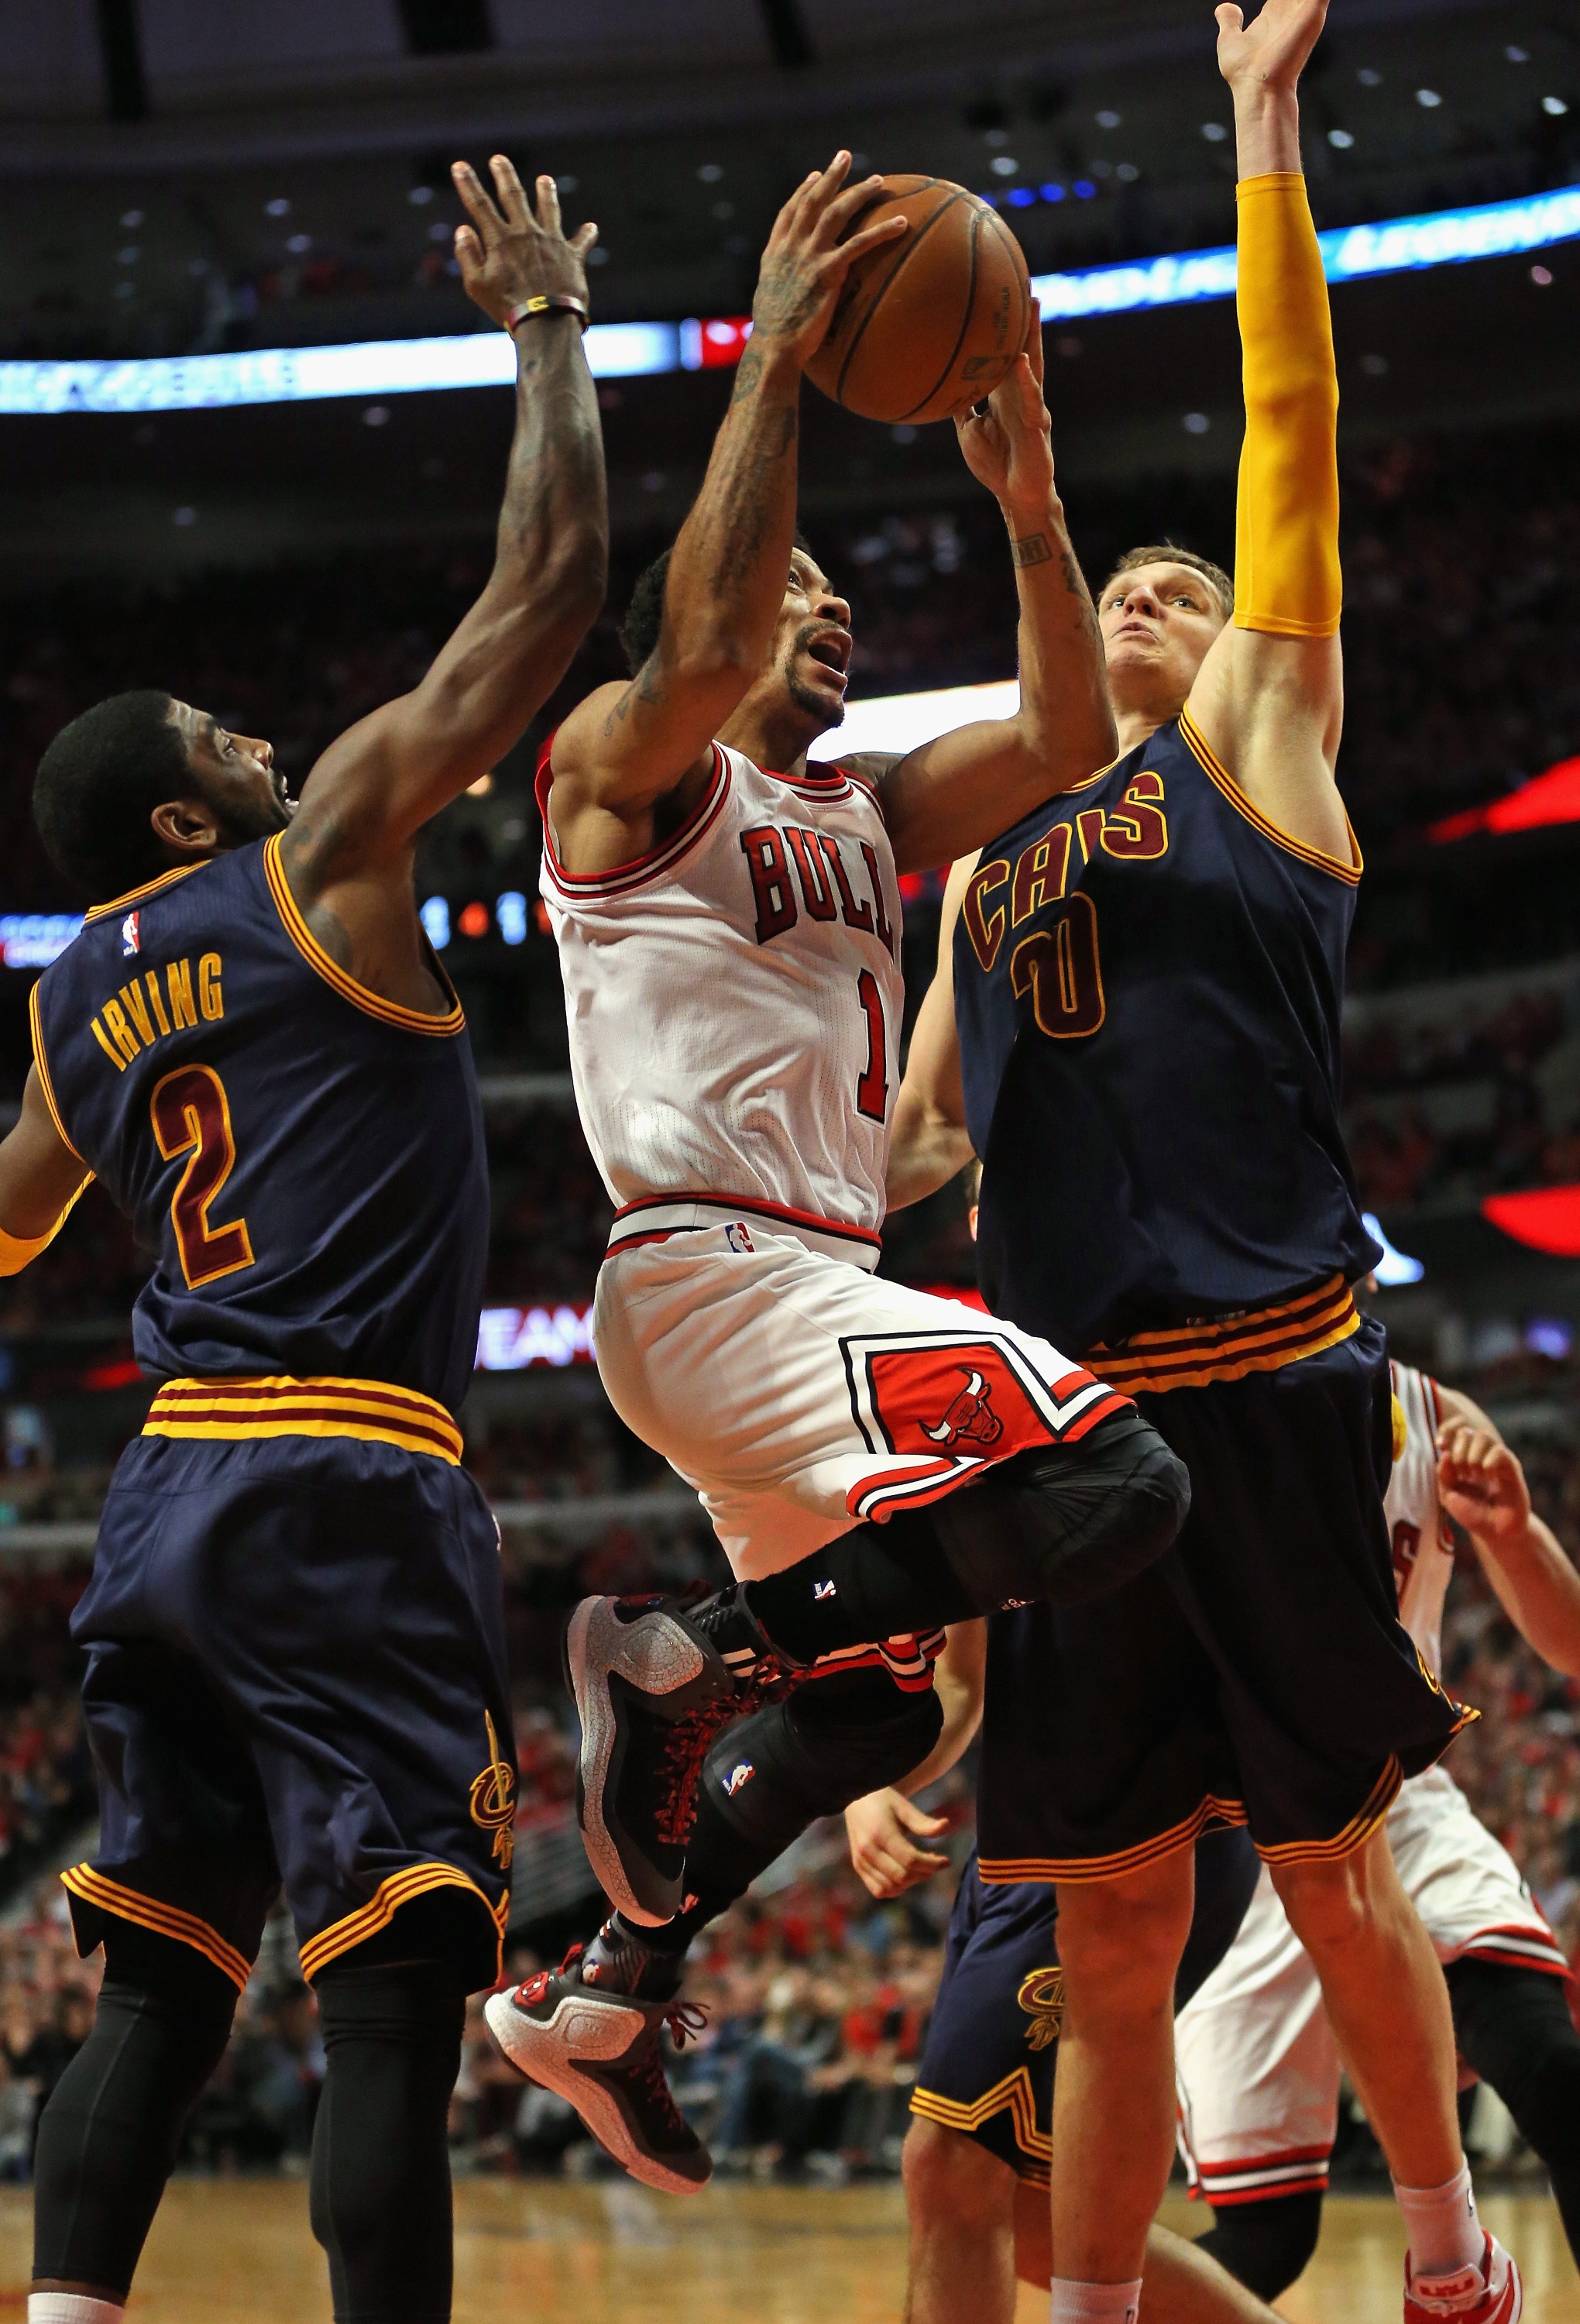 Expect to see Rose shooting over Cavs again on opening night. (Jonathan Daniel/Getty Images)